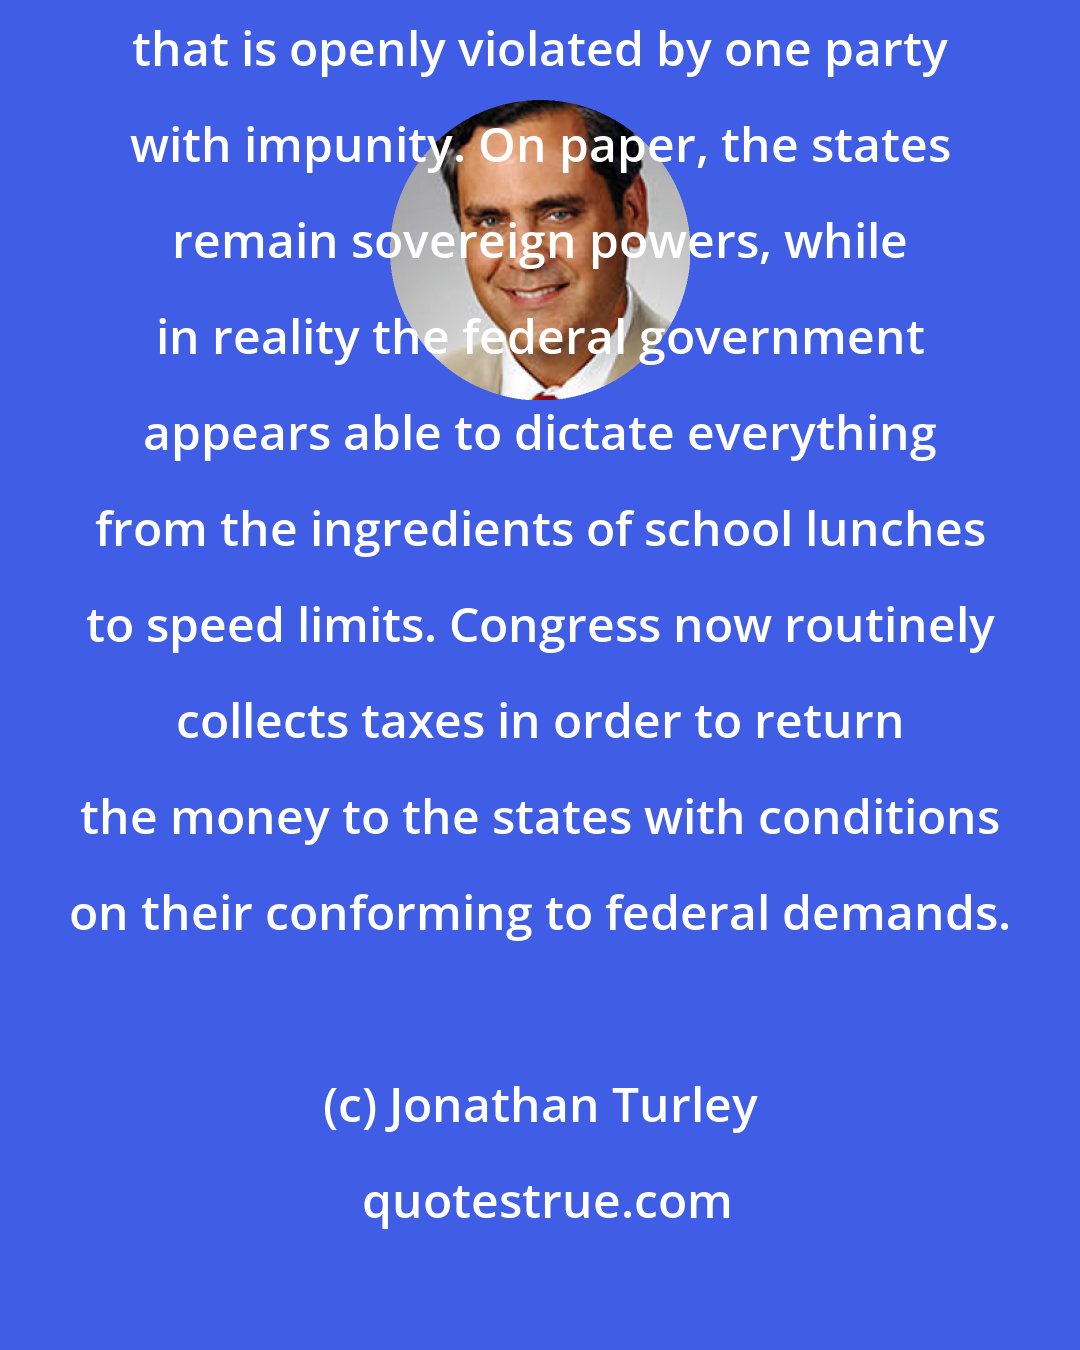 Jonathan Turley: For states' rights advocates, the Constitution is like a contract that is openly violated by one party with impunity. On paper, the states remain sovereign powers, while in reality the federal government appears able to dictate everything from the ingredients of school lunches to speed limits. Congress now routinely collects taxes in order to return the money to the states with conditions on their conforming to federal demands.